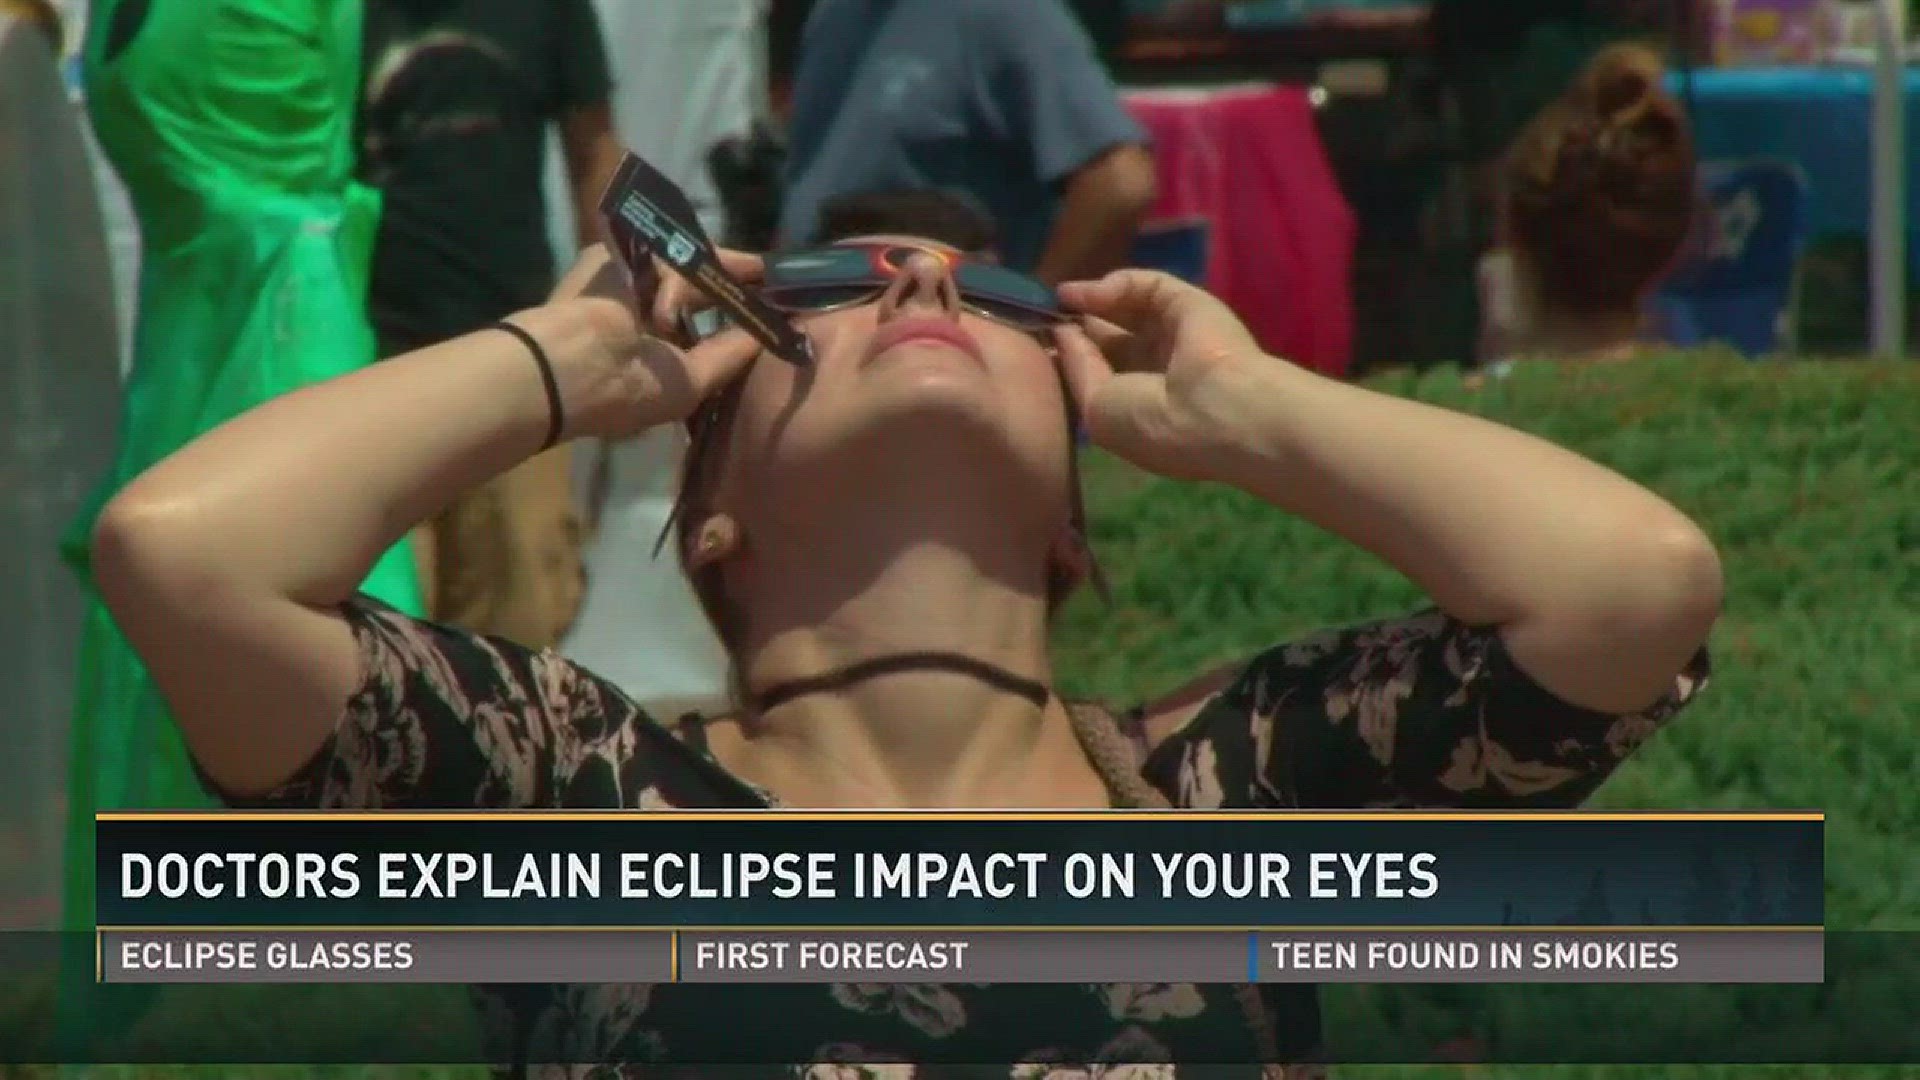 Staring at the sun can burn your eyes, but there are no pain sensors there, so how do you know if this happened to you while watching the eclipse?